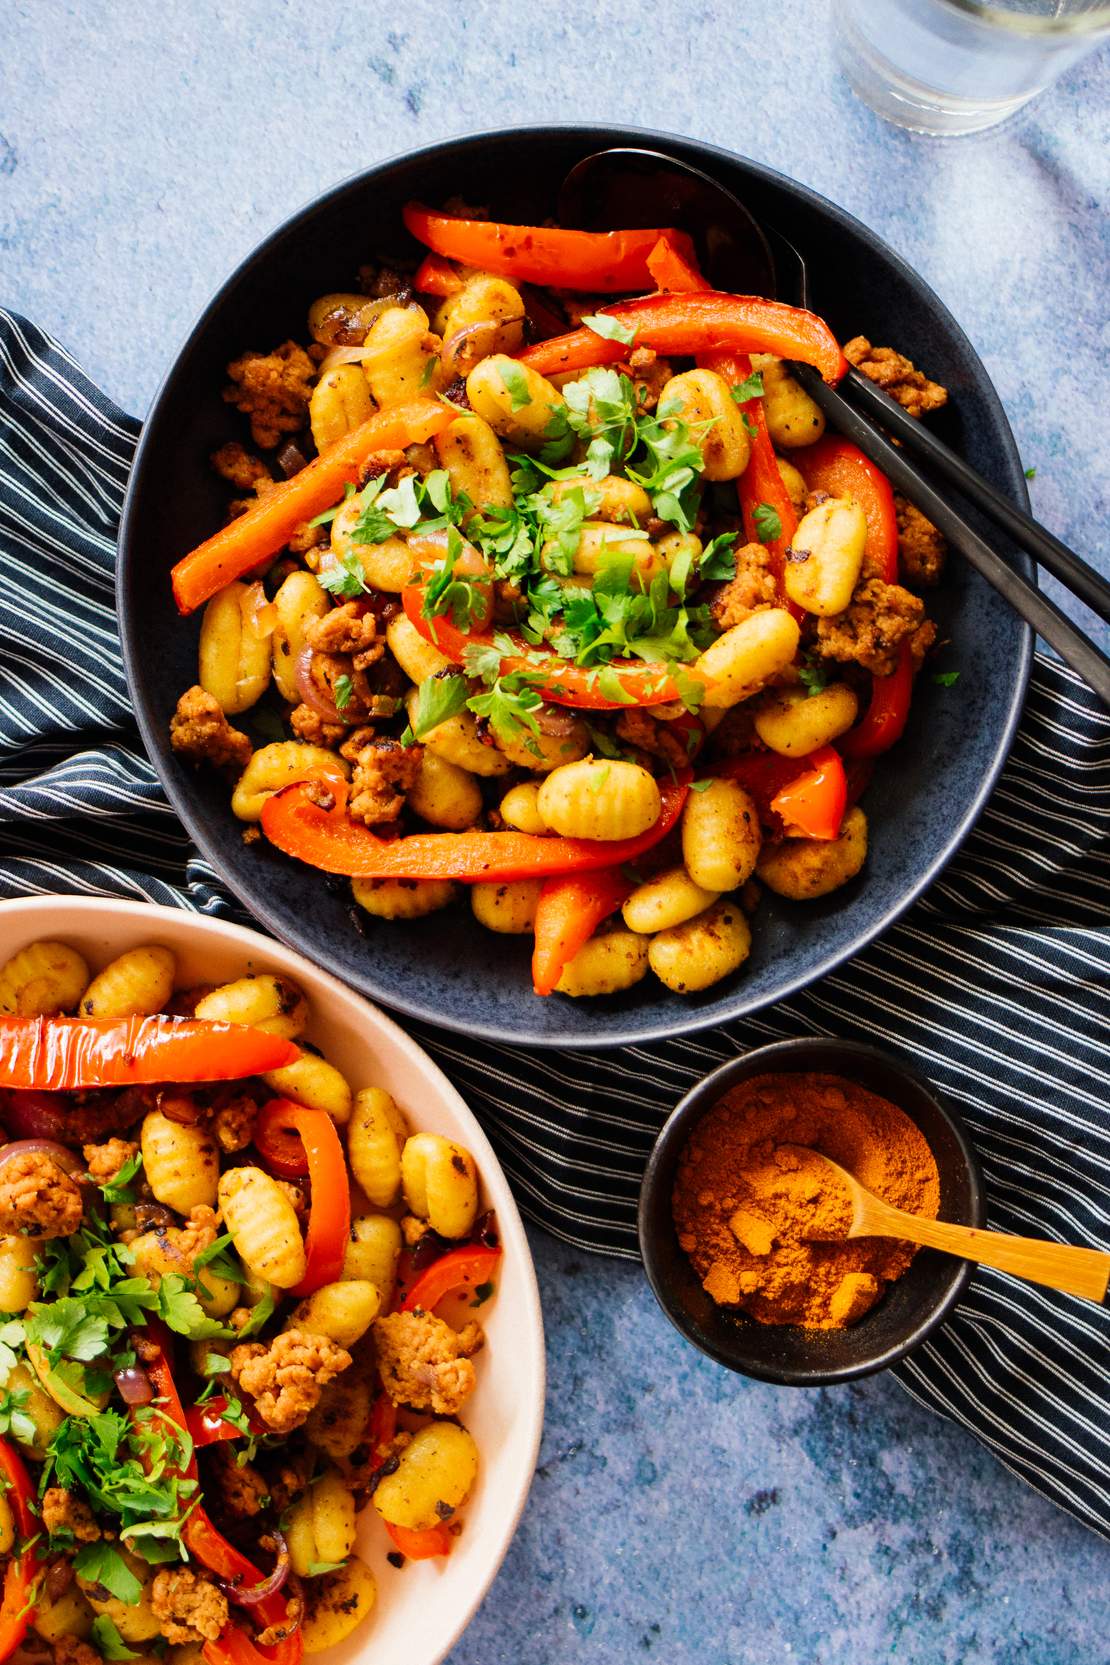 R570 Vegan Pan-fried Gnocchi with Vegan “Minced Meat“ & Bell Peppers